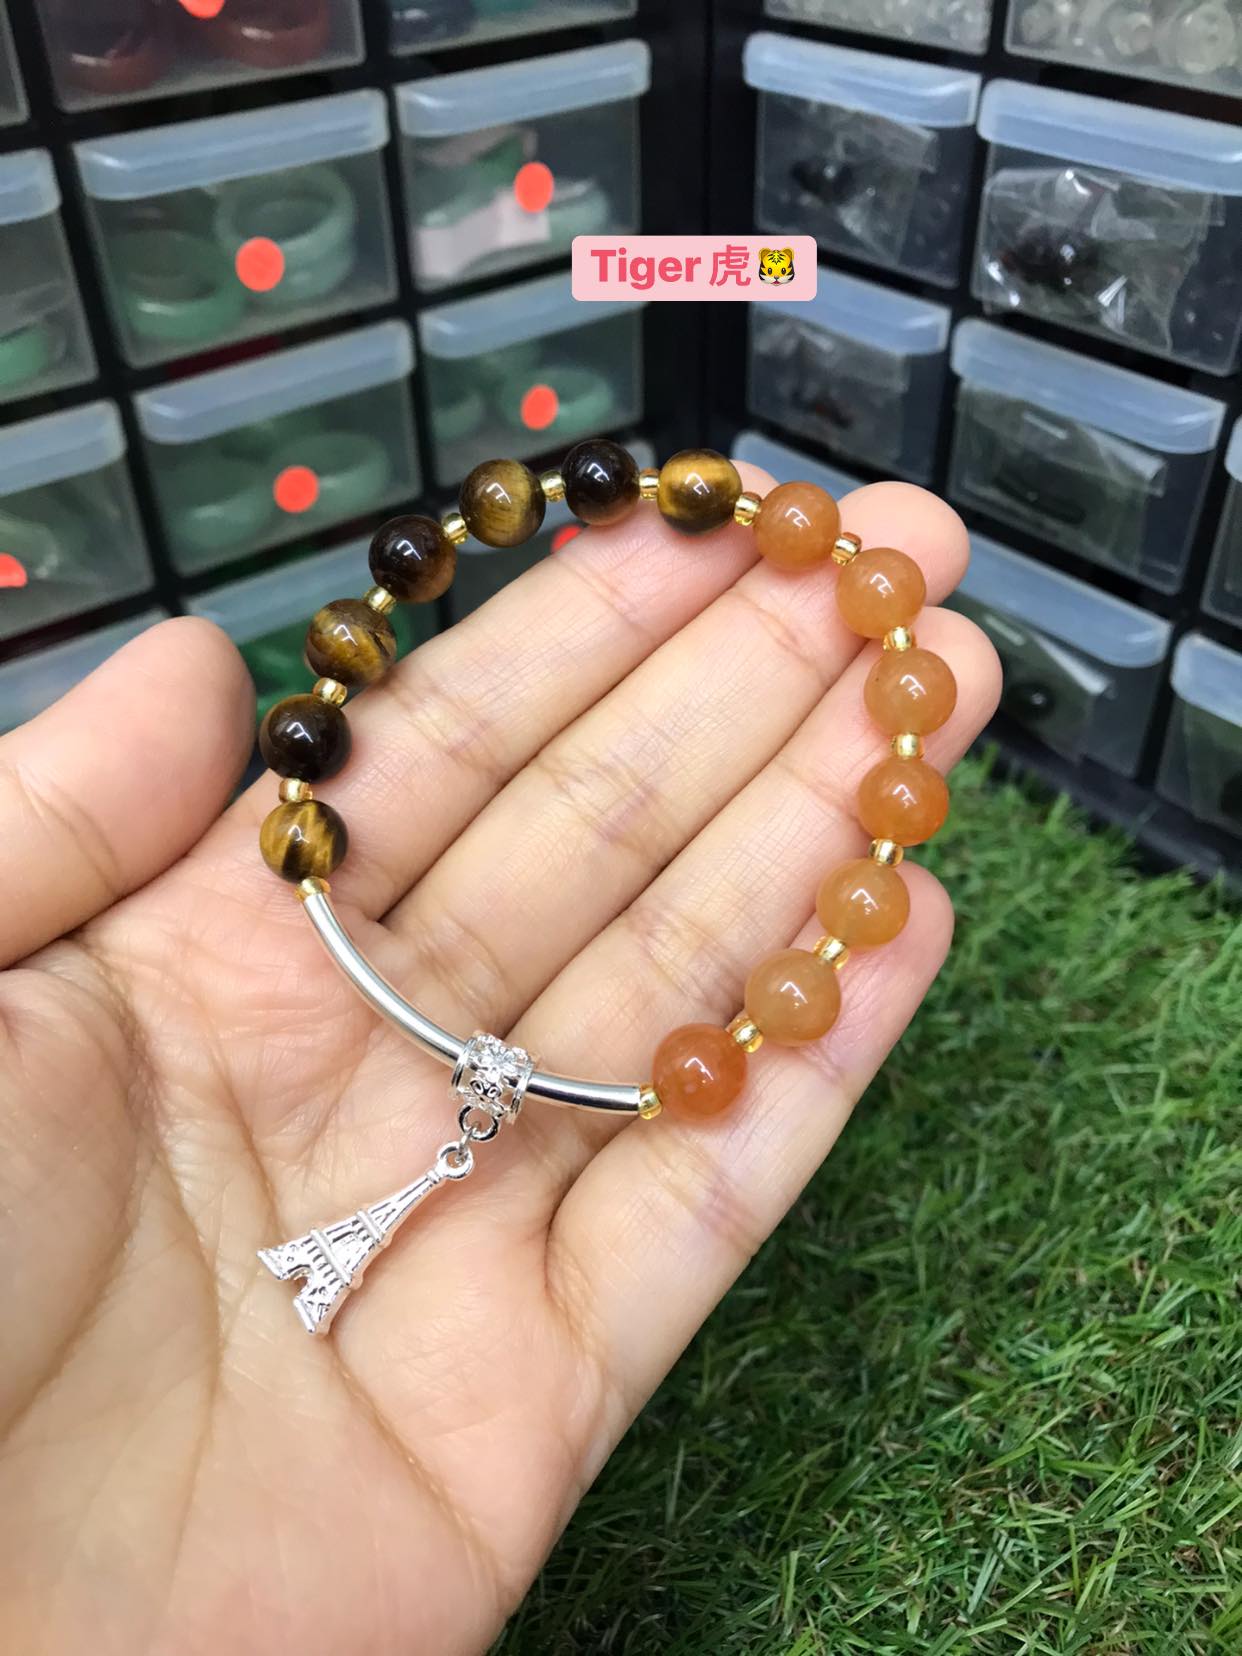 Tiger's Eye Chinese Zodiac Charm Bracelet for Good Luck and